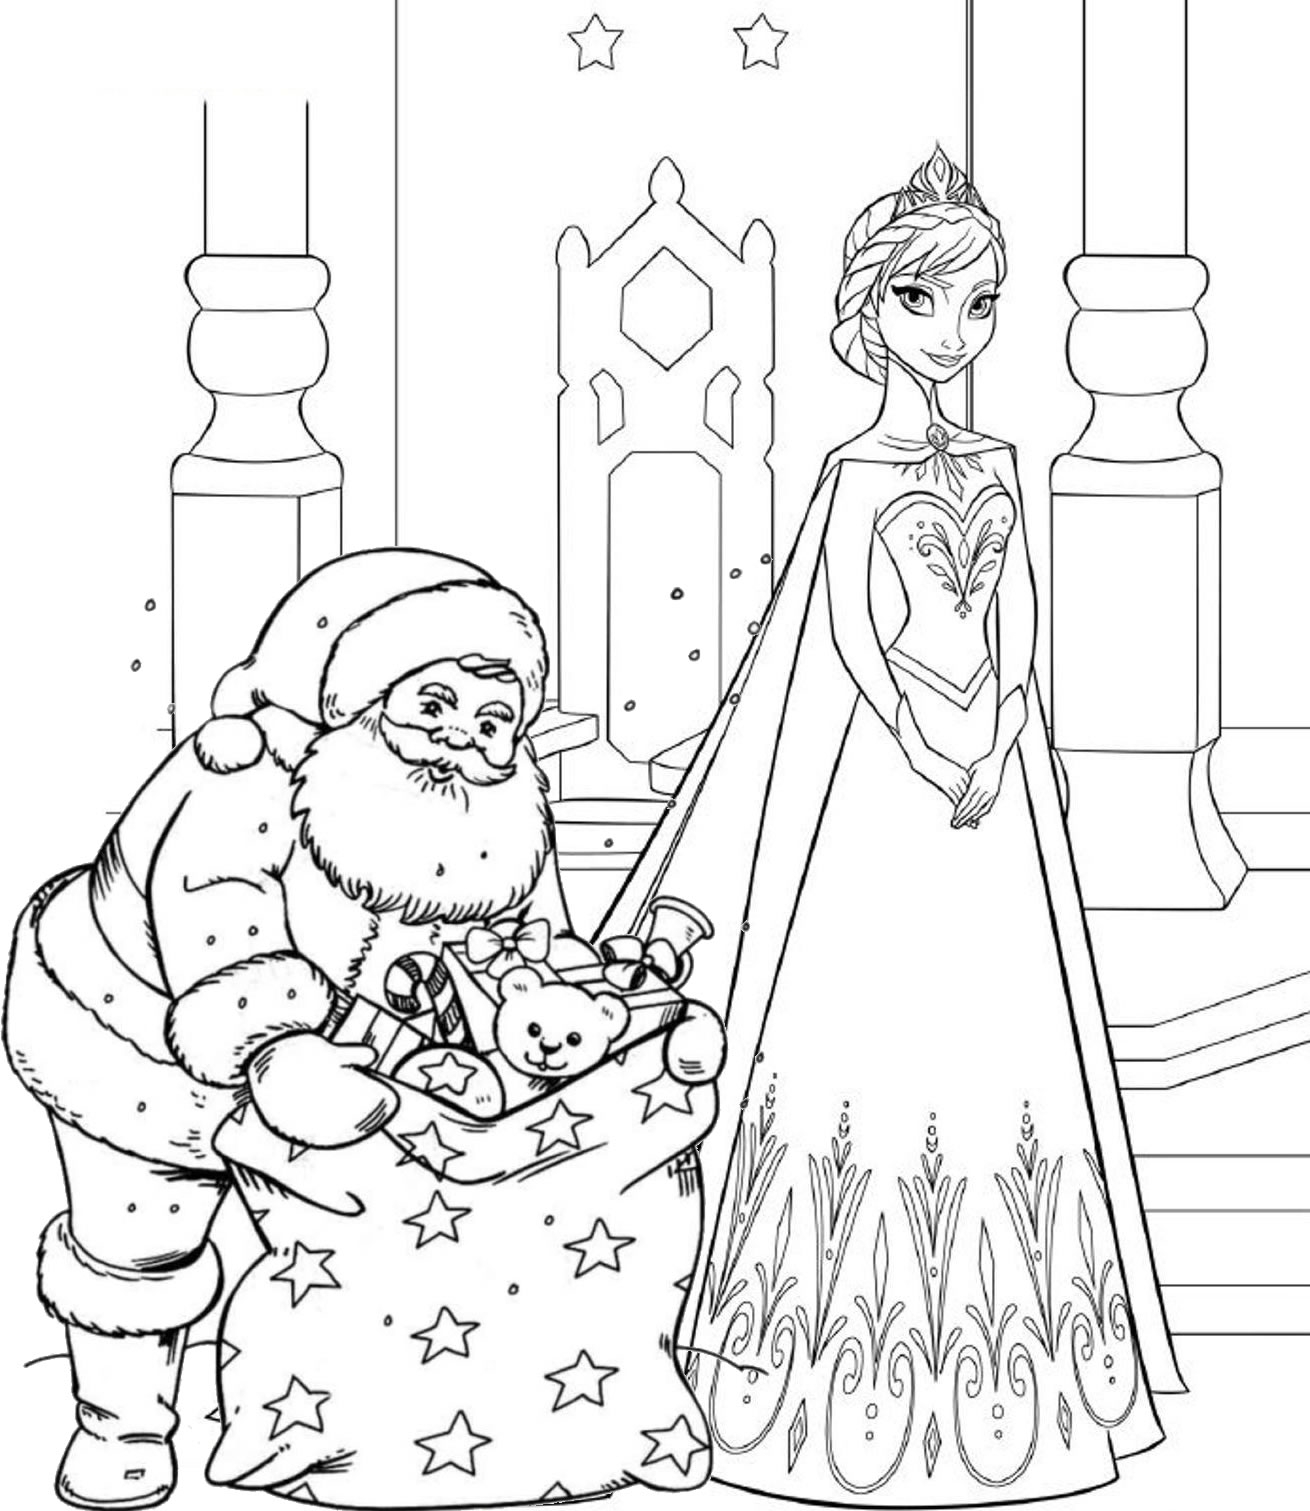 Elsa Christmas Coloring Page : Disney Christmas Coloring Pages - Best